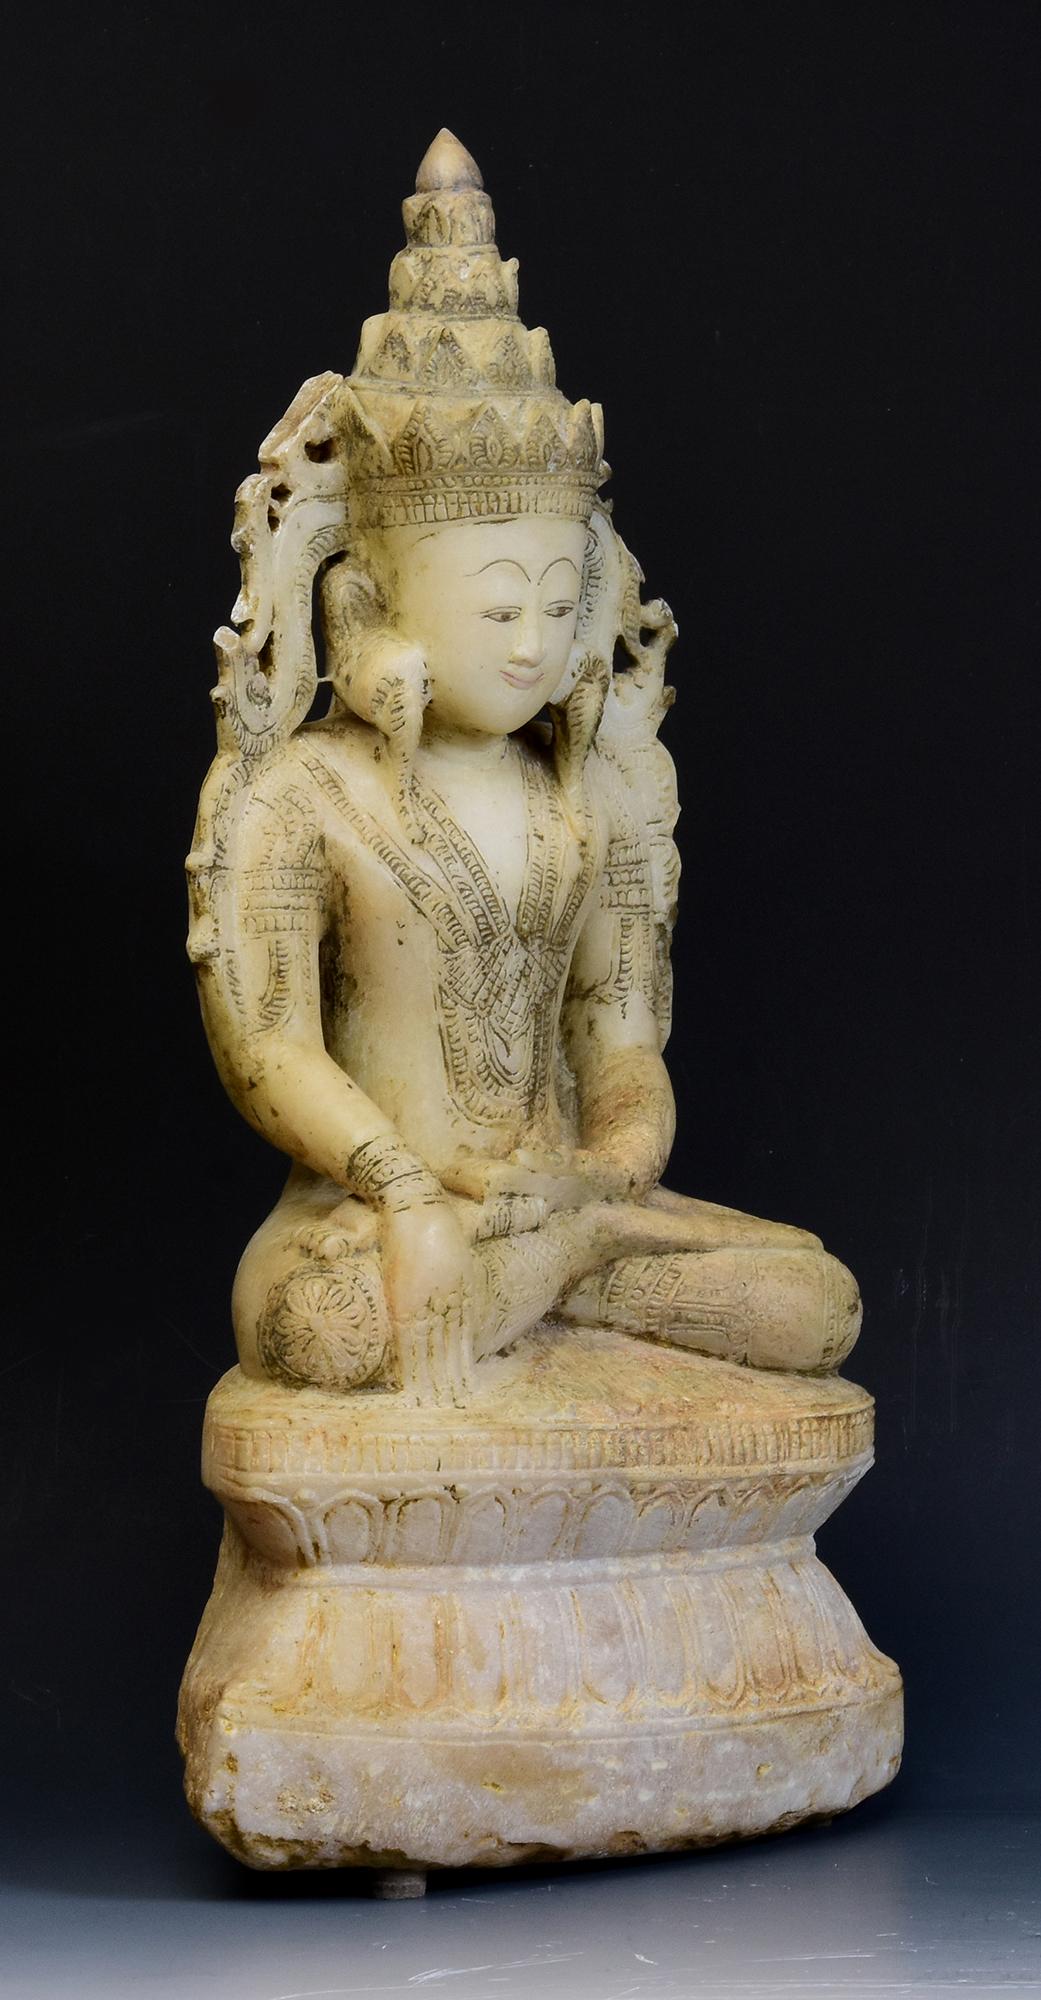 18th C., Shan, Rare Antique Burmese Alabaster Marble Seated King Buddha Statue For Sale 10